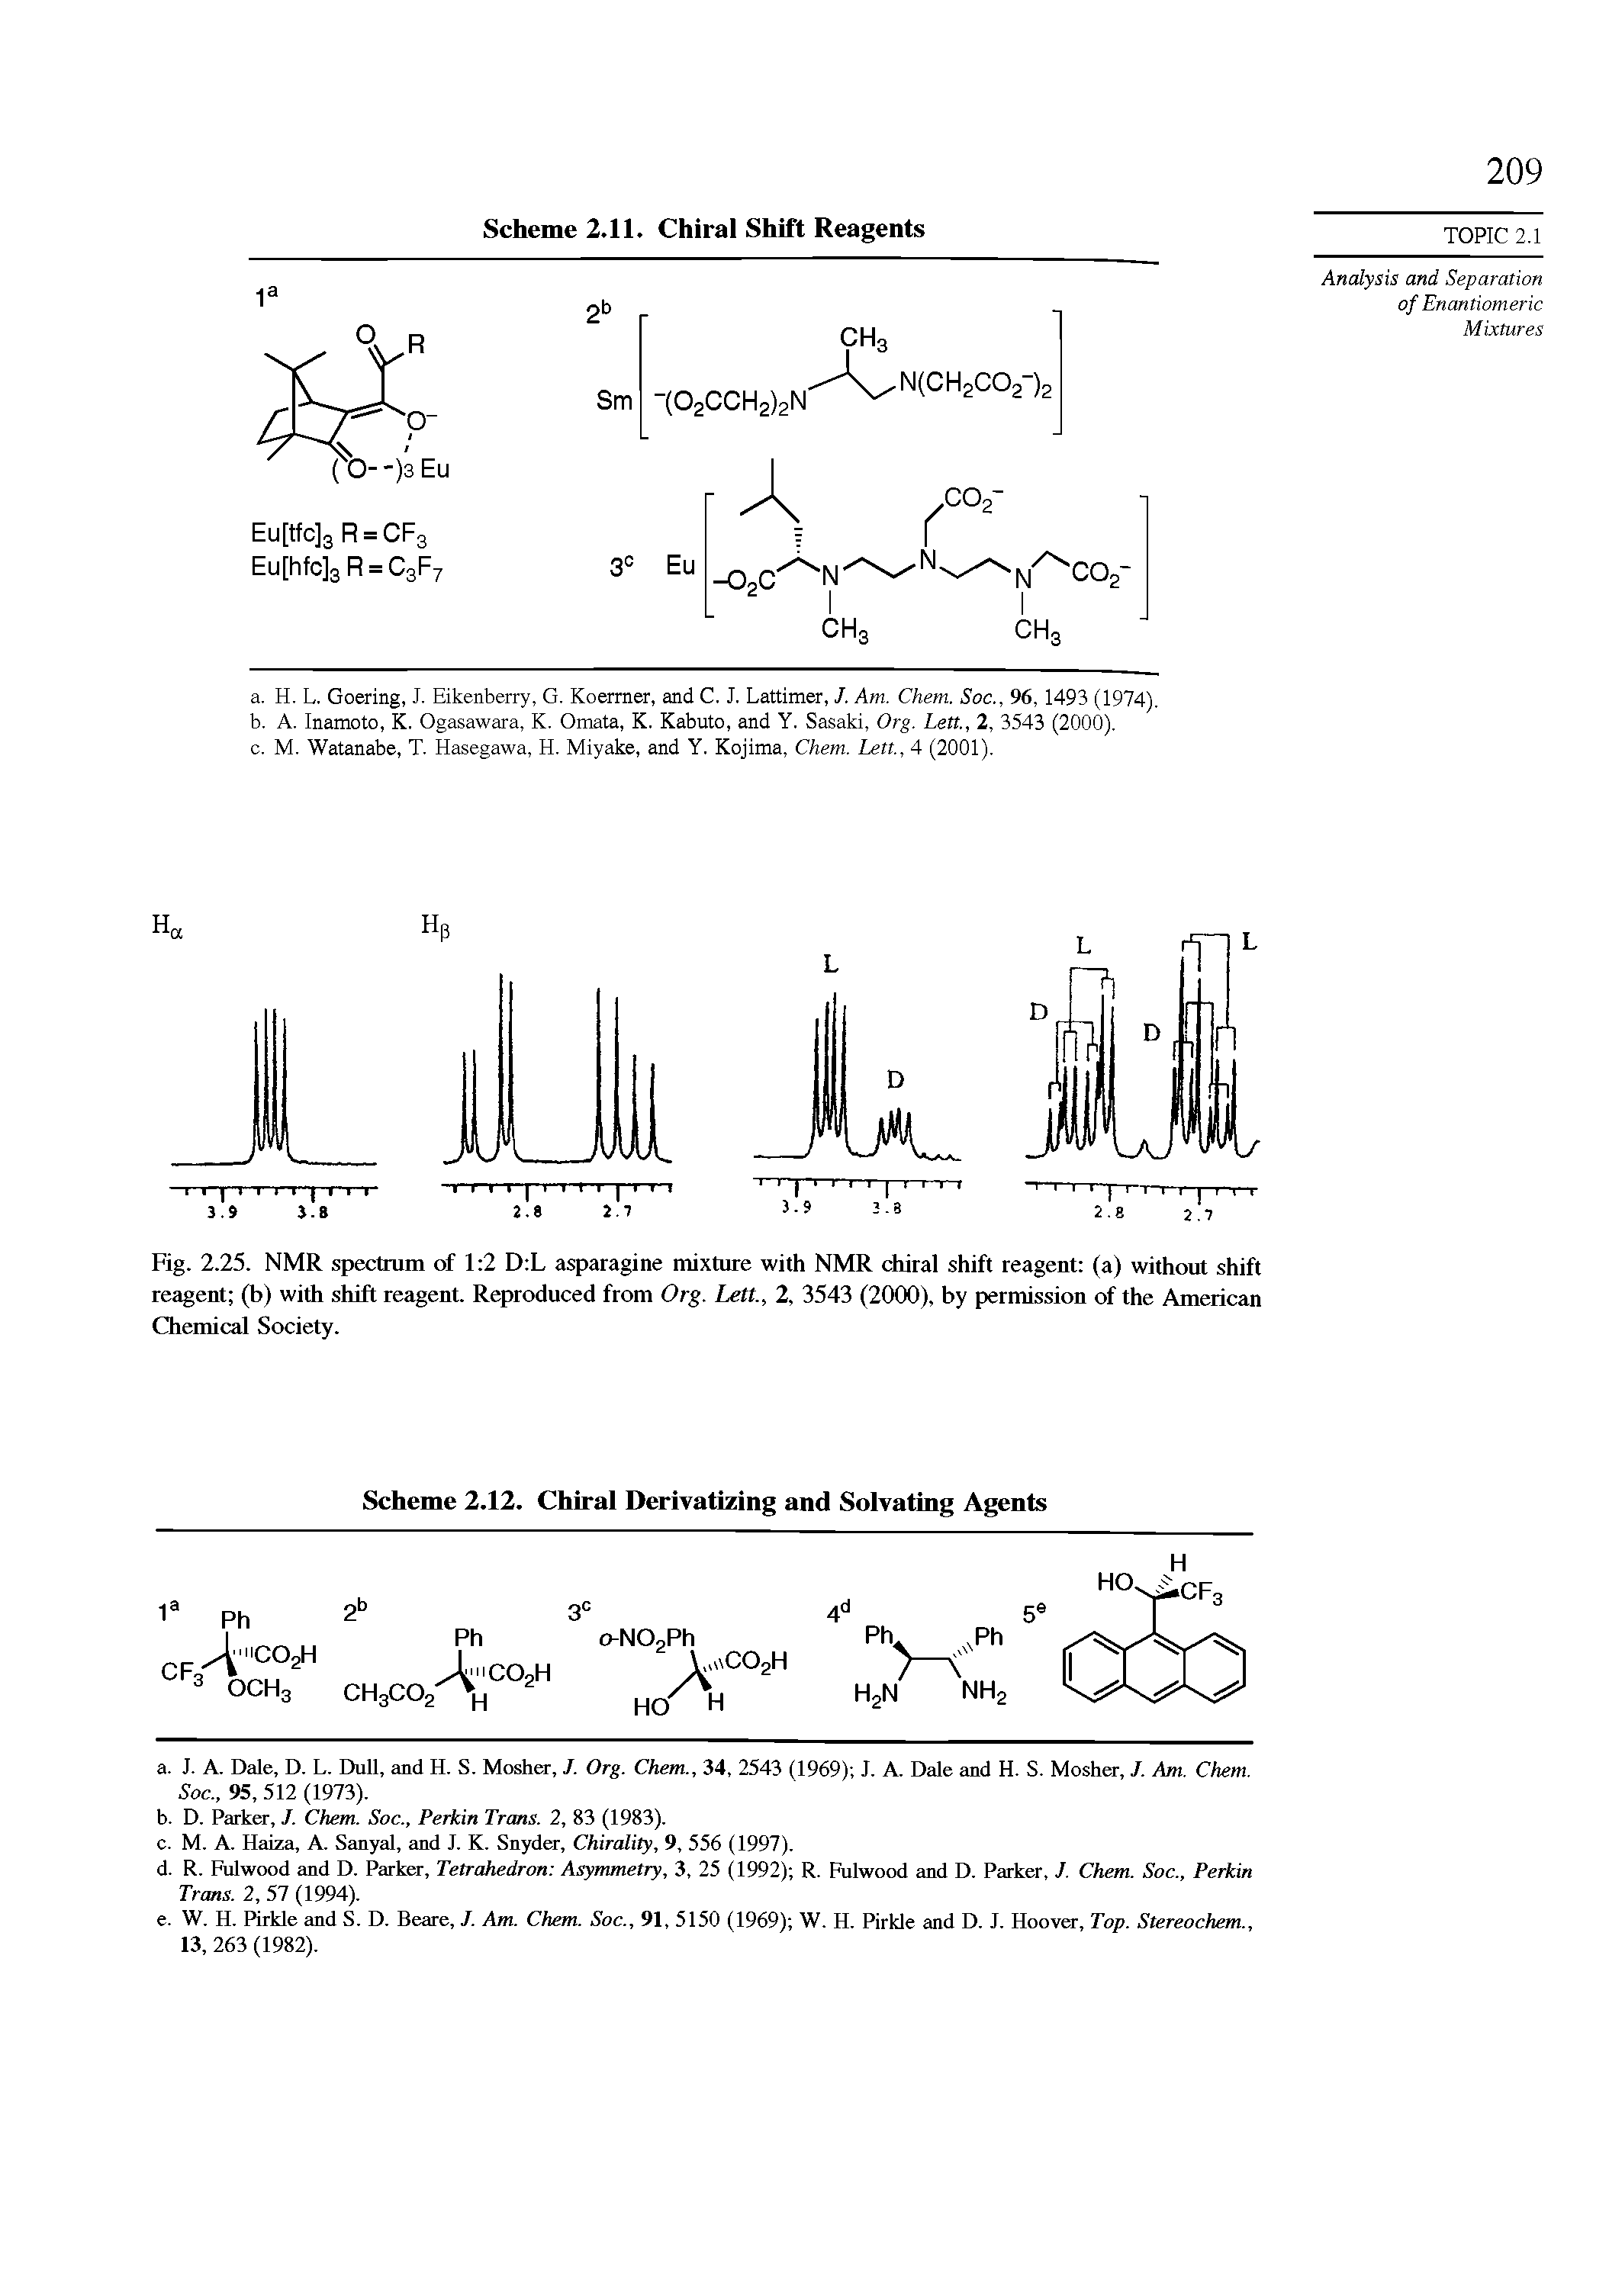 Fig. 2.25. NMR spectrum of 1 2 D L asparagine mixture with NMR chiral shift reagent (a) without shift reagent (b) with shift reagent. Reproduced from Org. Lett, 2, 3543 (2000), by permission of the American Chemical Society.